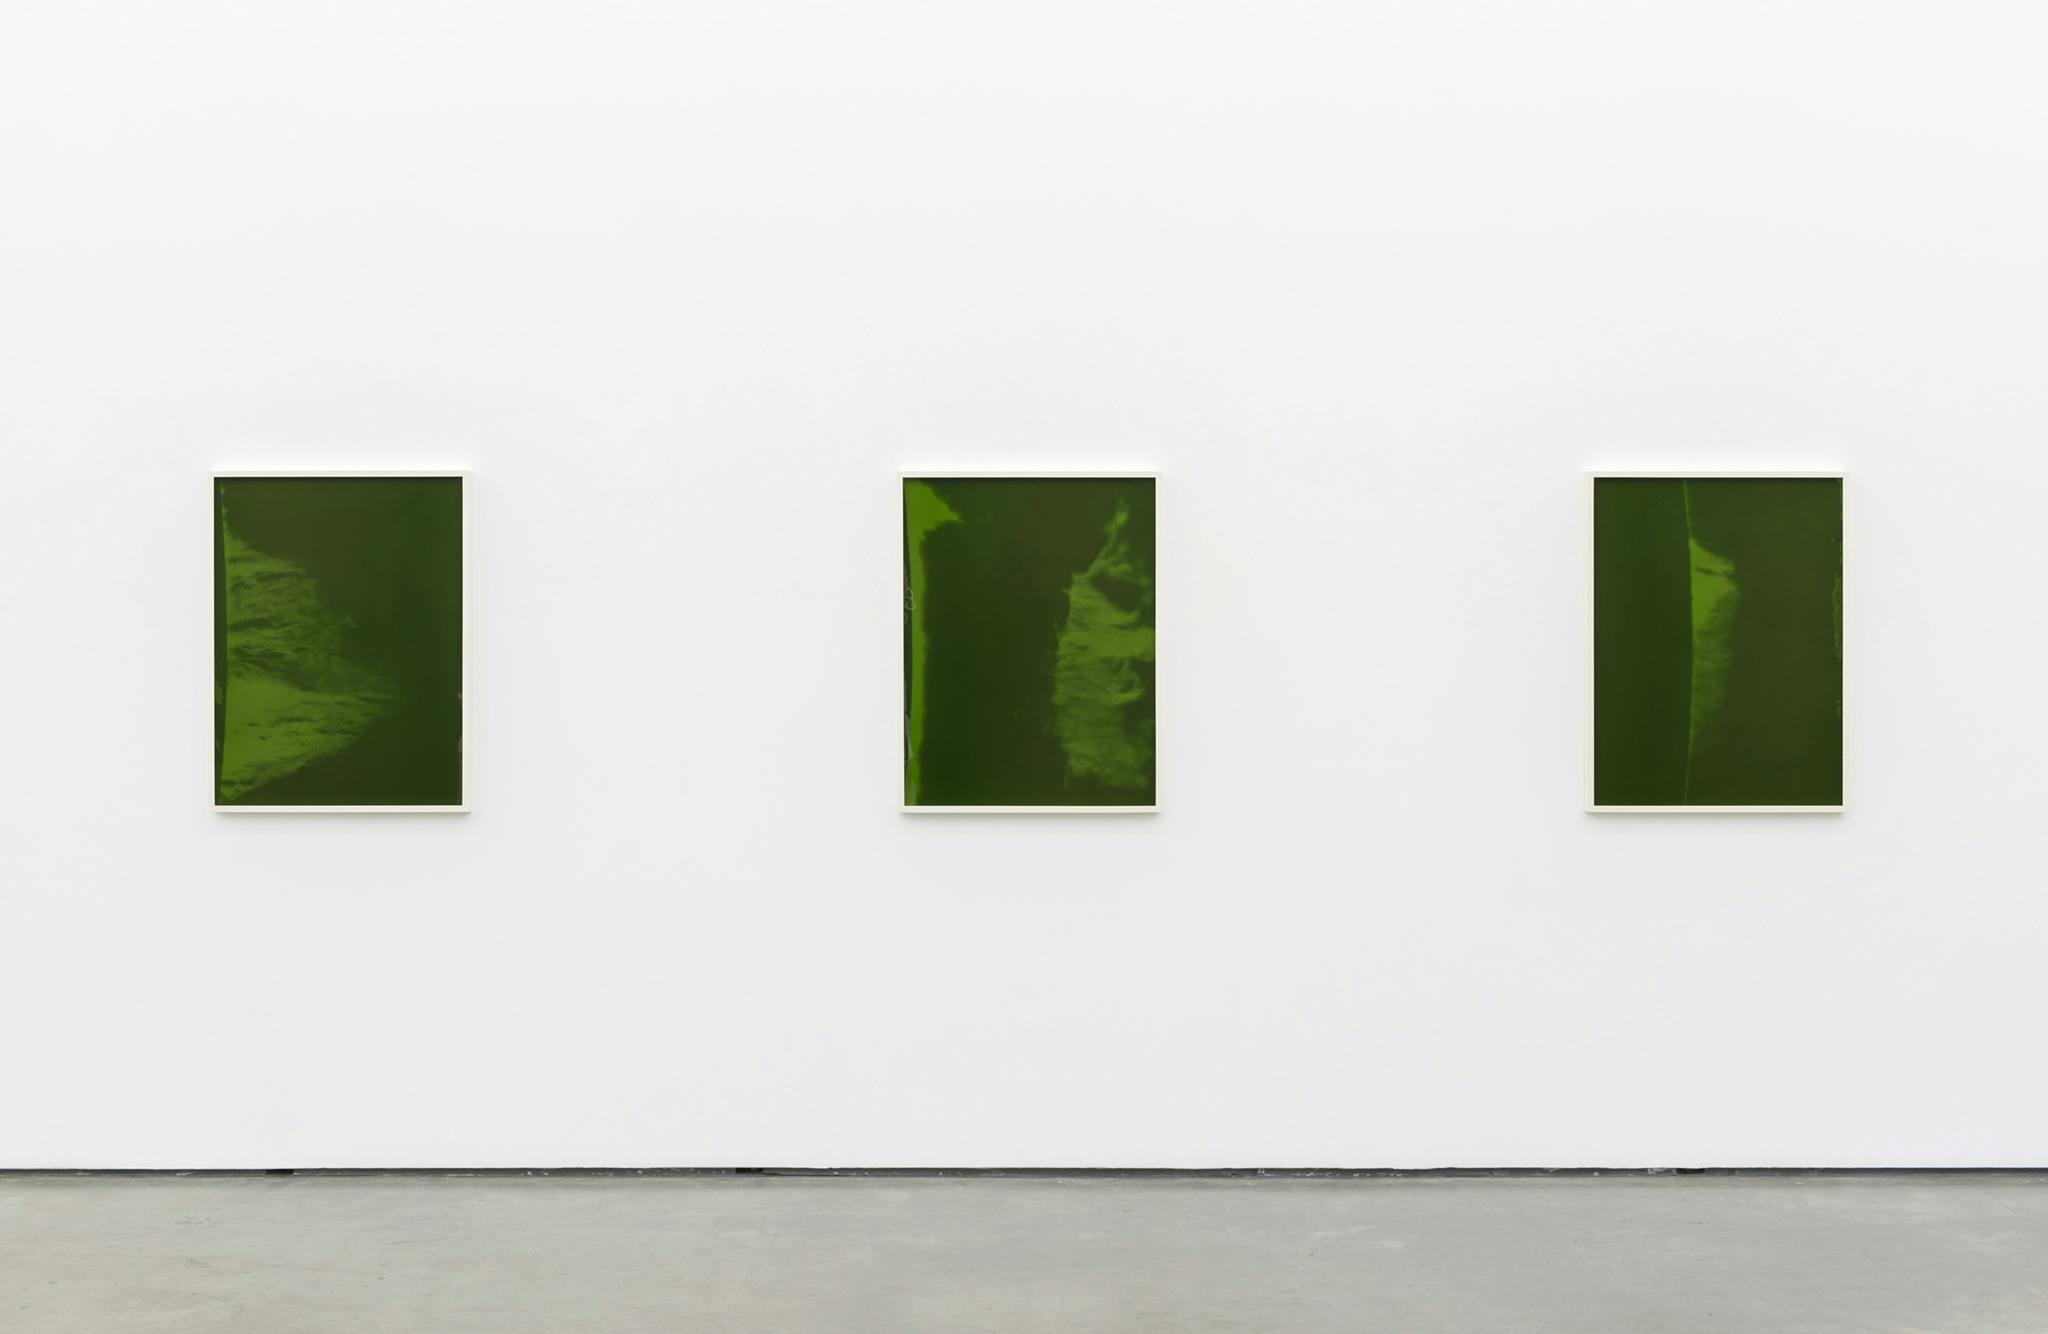 Three framed photographic prints hang on the wall of a gallery space. The images are of the surface of the sun overlaid with the frame’s deep, green glass. 